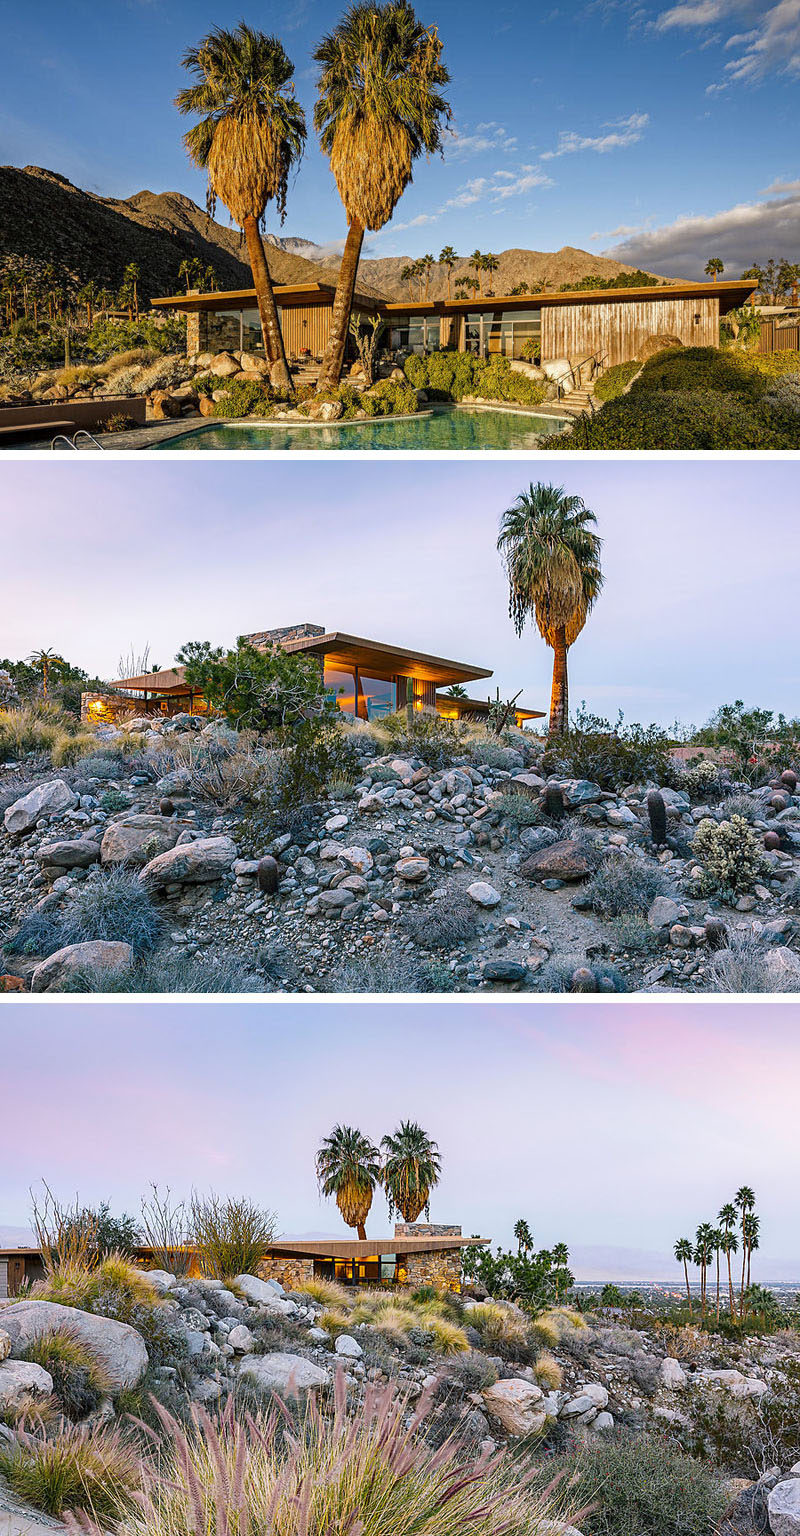 Positioned within the desert landscape, this house is an example of mid-century modern architecture. Wood features have been combined with stone walls and plenty of glass. #Wood #Stone #MidCenturyModern #House